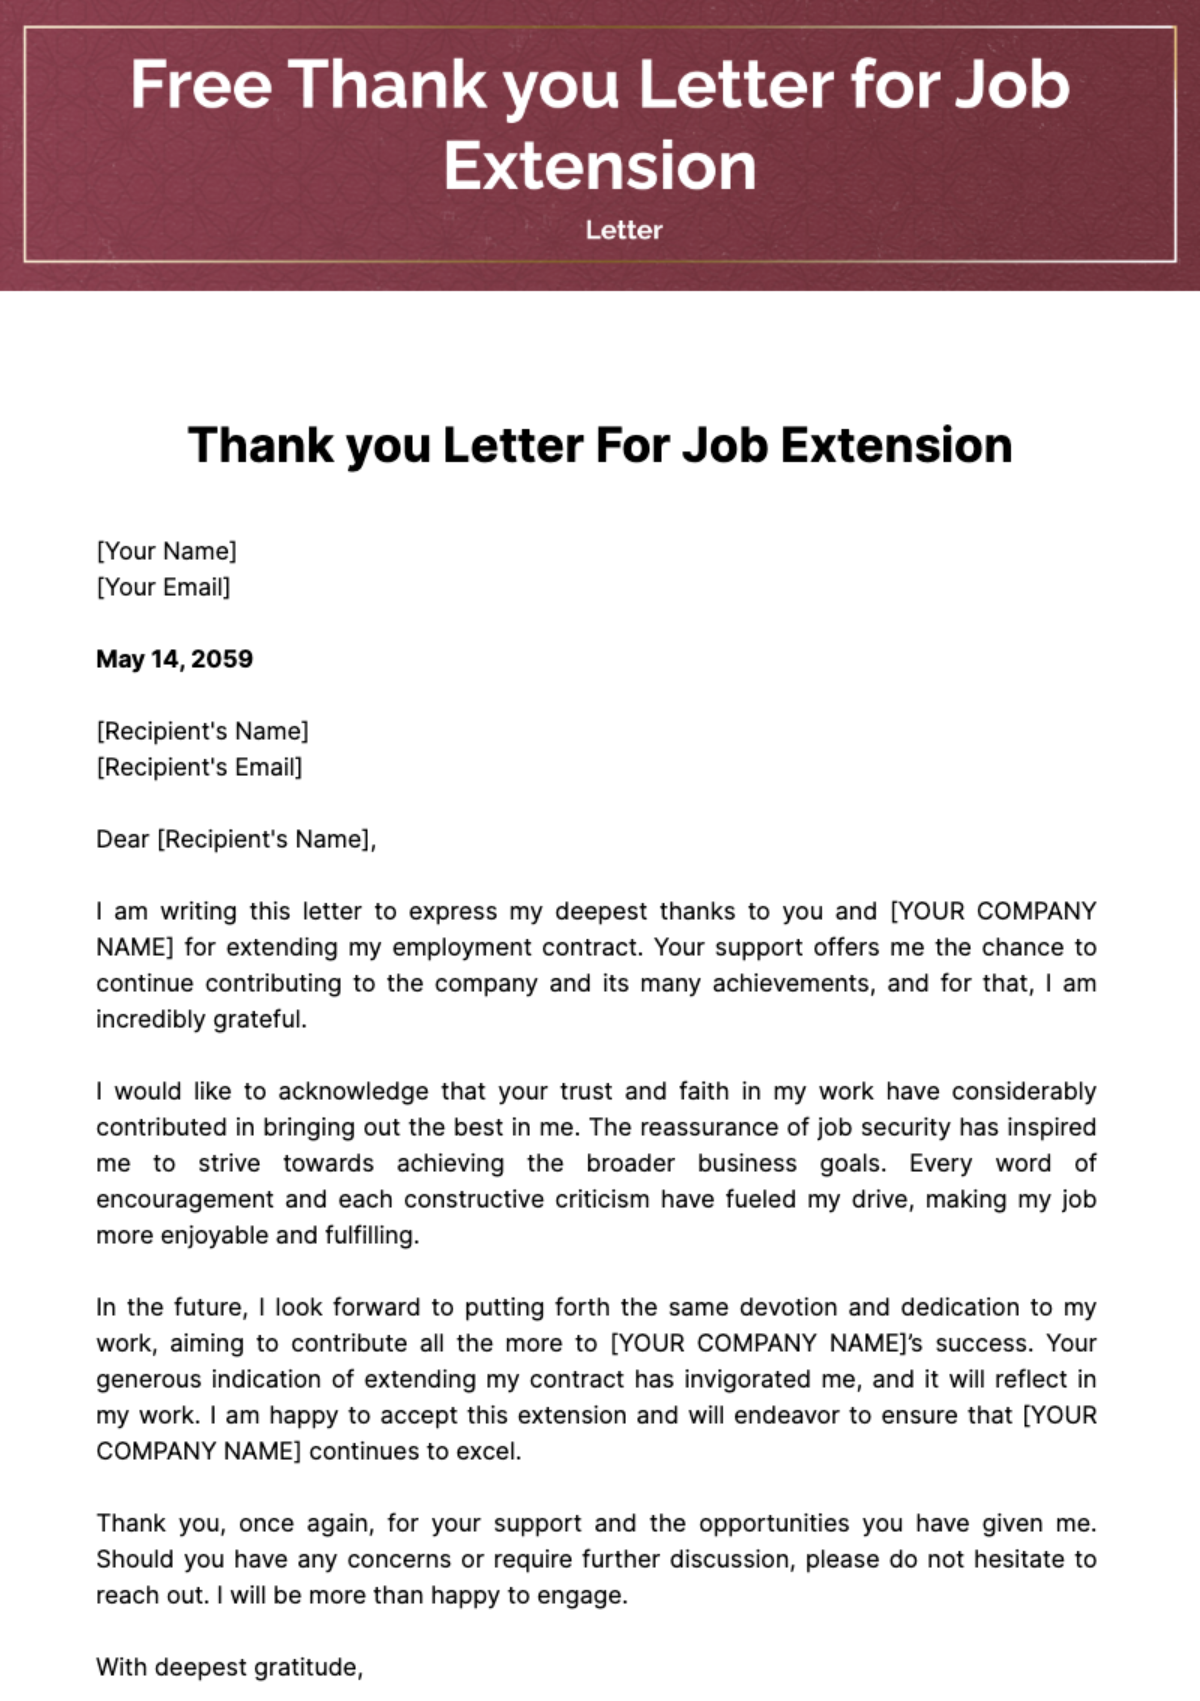 Free Thank you Letter for Job Extension Template